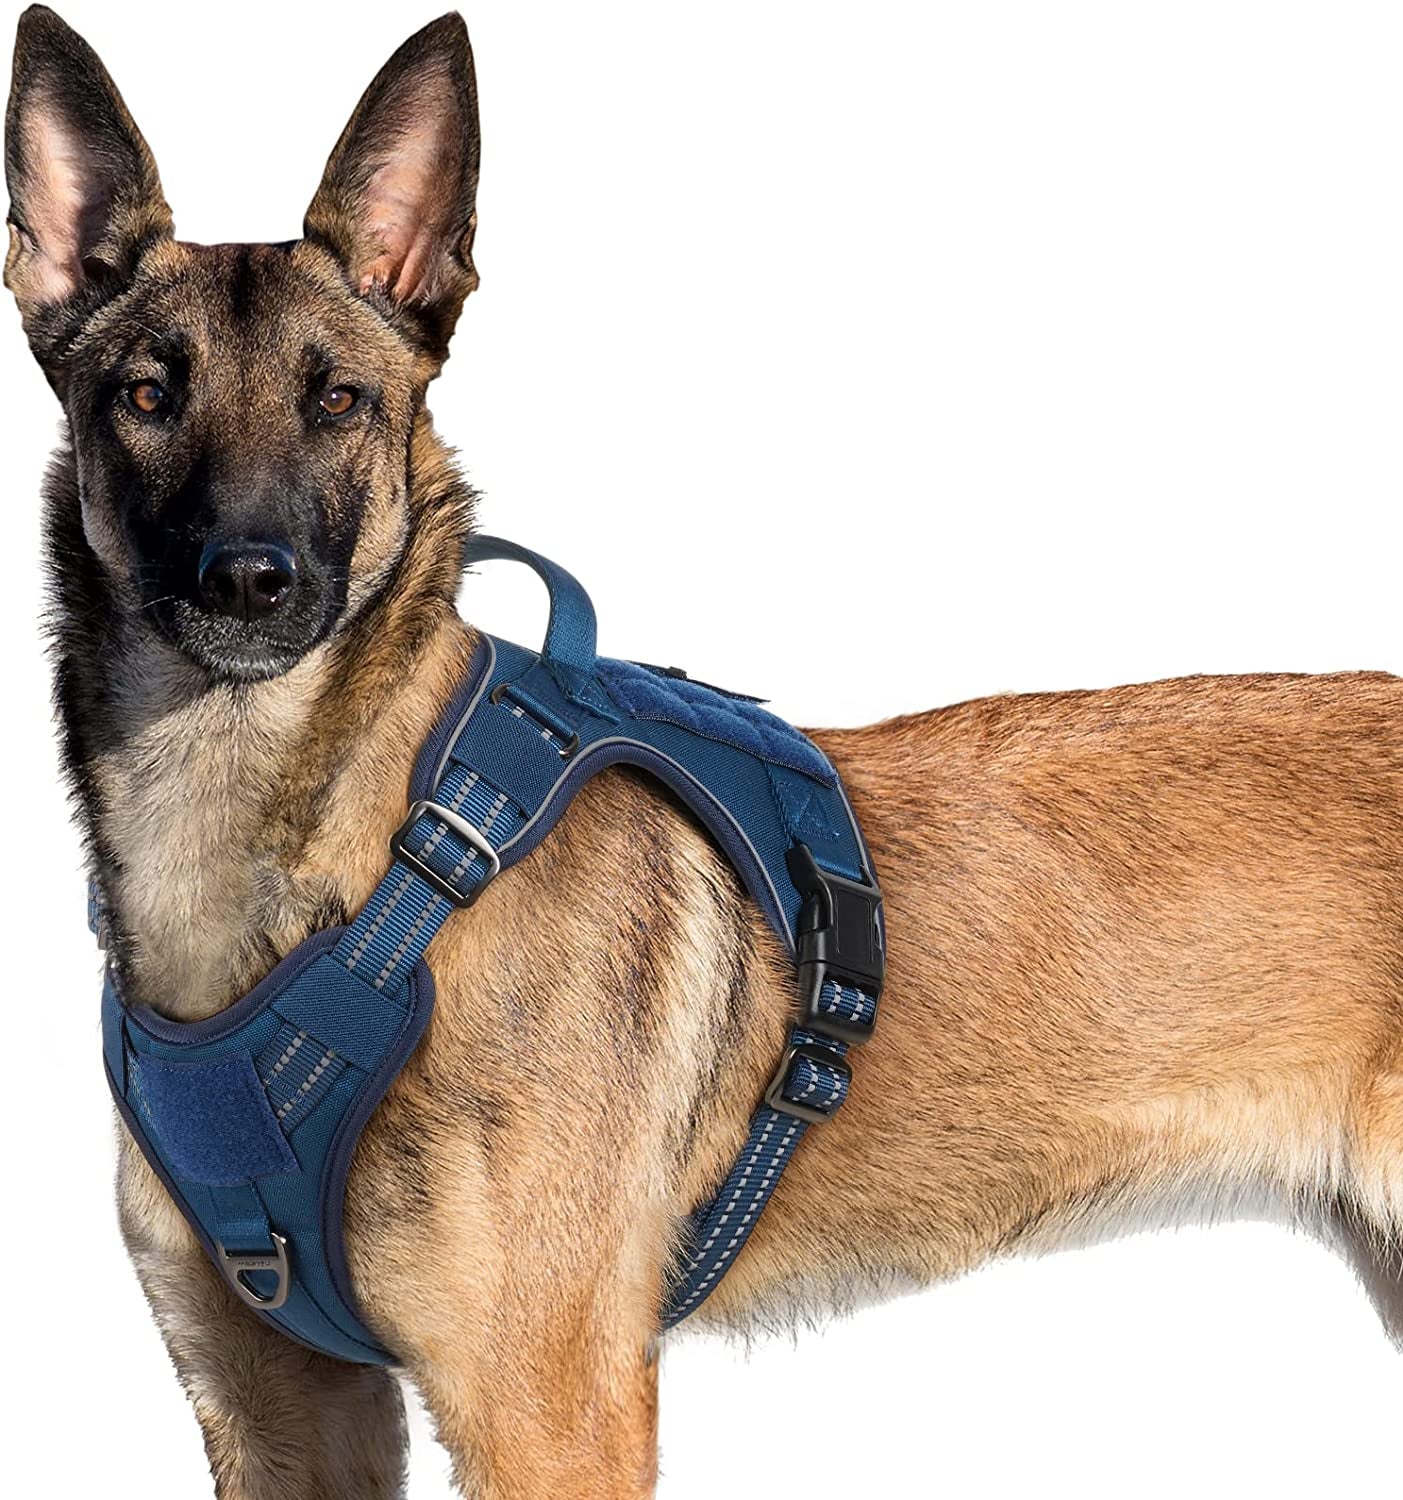 Rabbitgoo Tactical Dog Harness No Pull, Military Dog Vest Harness with Handle & Molle, Easy Control Service Dog Harness for Large Dogs Training Walking, Adjustable Reflective Pet Harness, Black, L Animals & Pet Supplies > Pet Supplies > Dog Supplies > Dog Apparel GLOBEGOU CO.,LTD Blue X-Large 